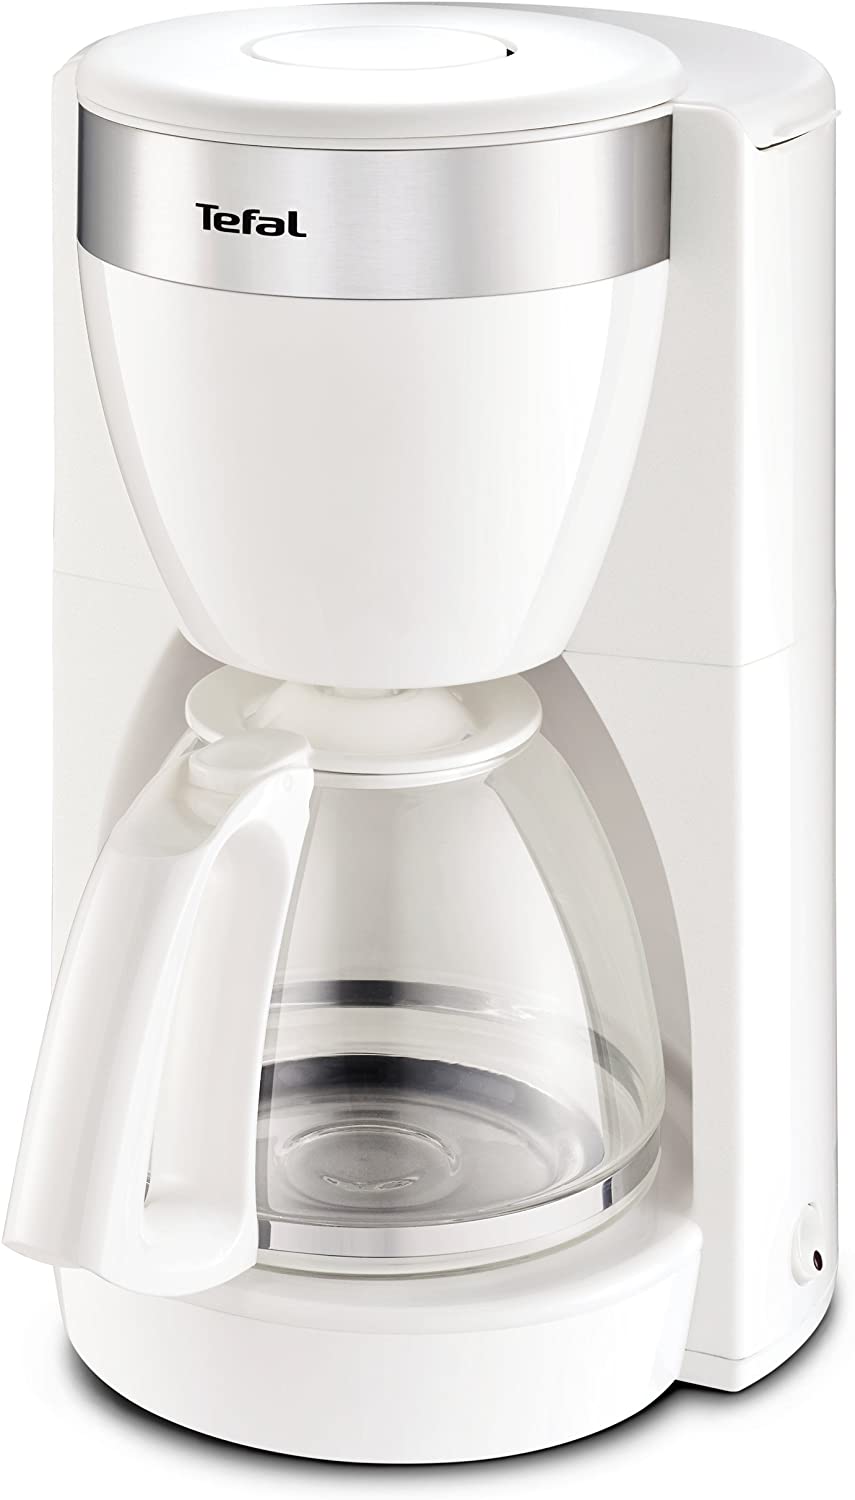 Tefal CM1801 Deflini Plus Glass Coffee Maker with Stainless Steel Elements 10-15 Cups, 1000 Watts, White